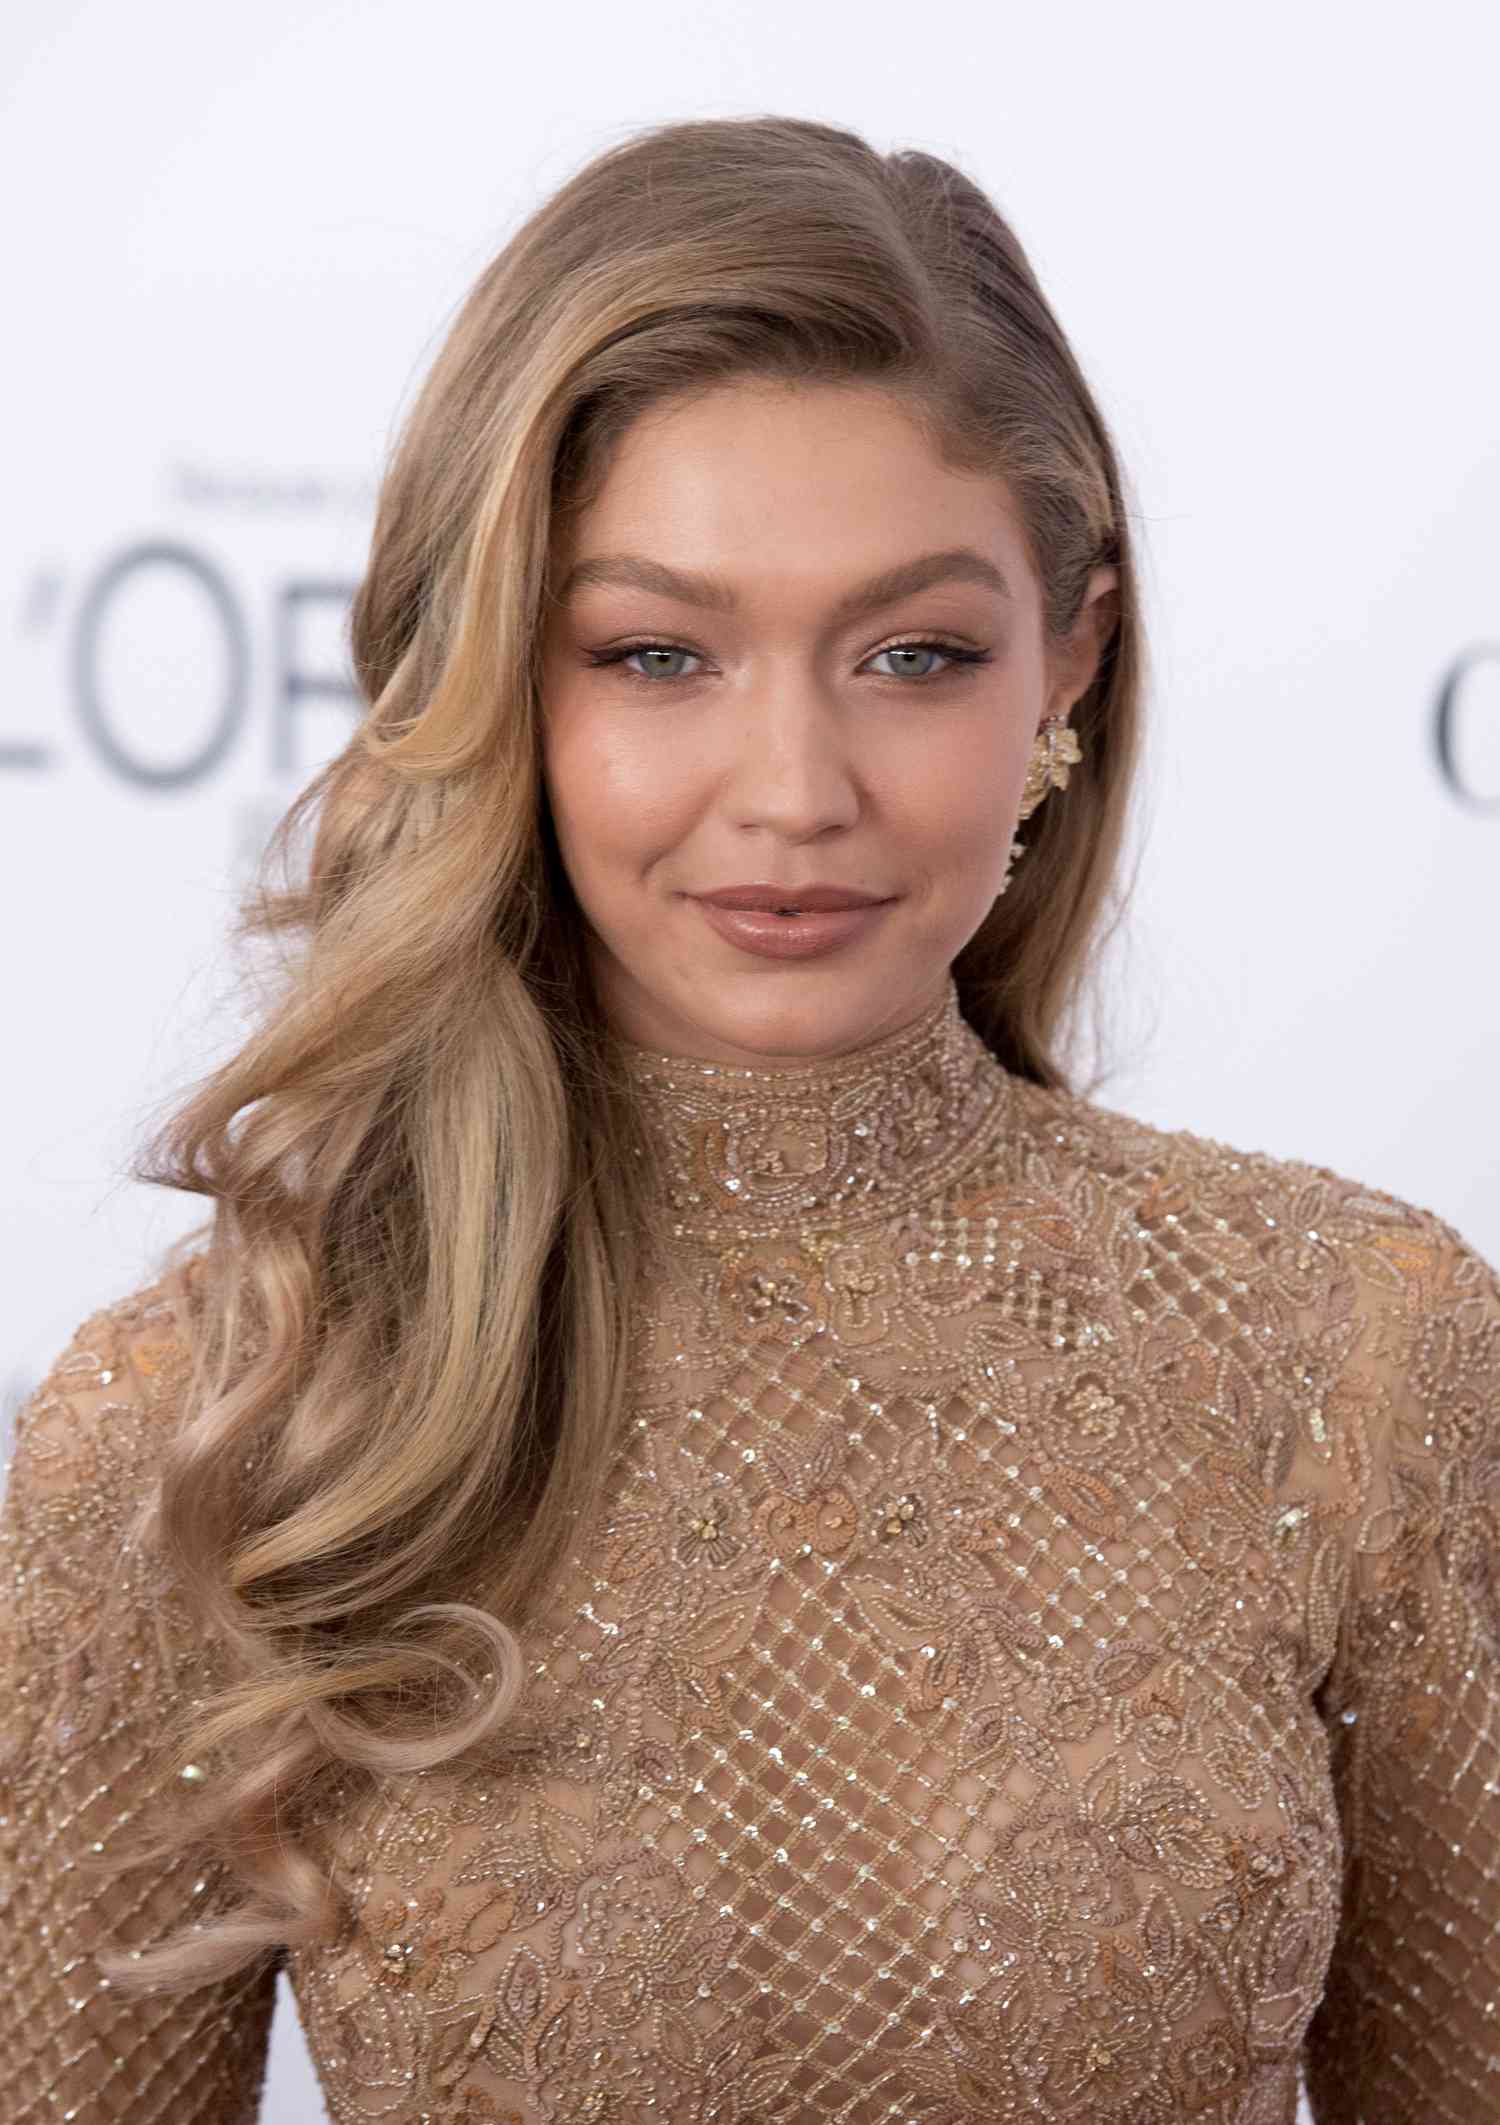 Model Gigi Hadid with blonde waves and a deep side part